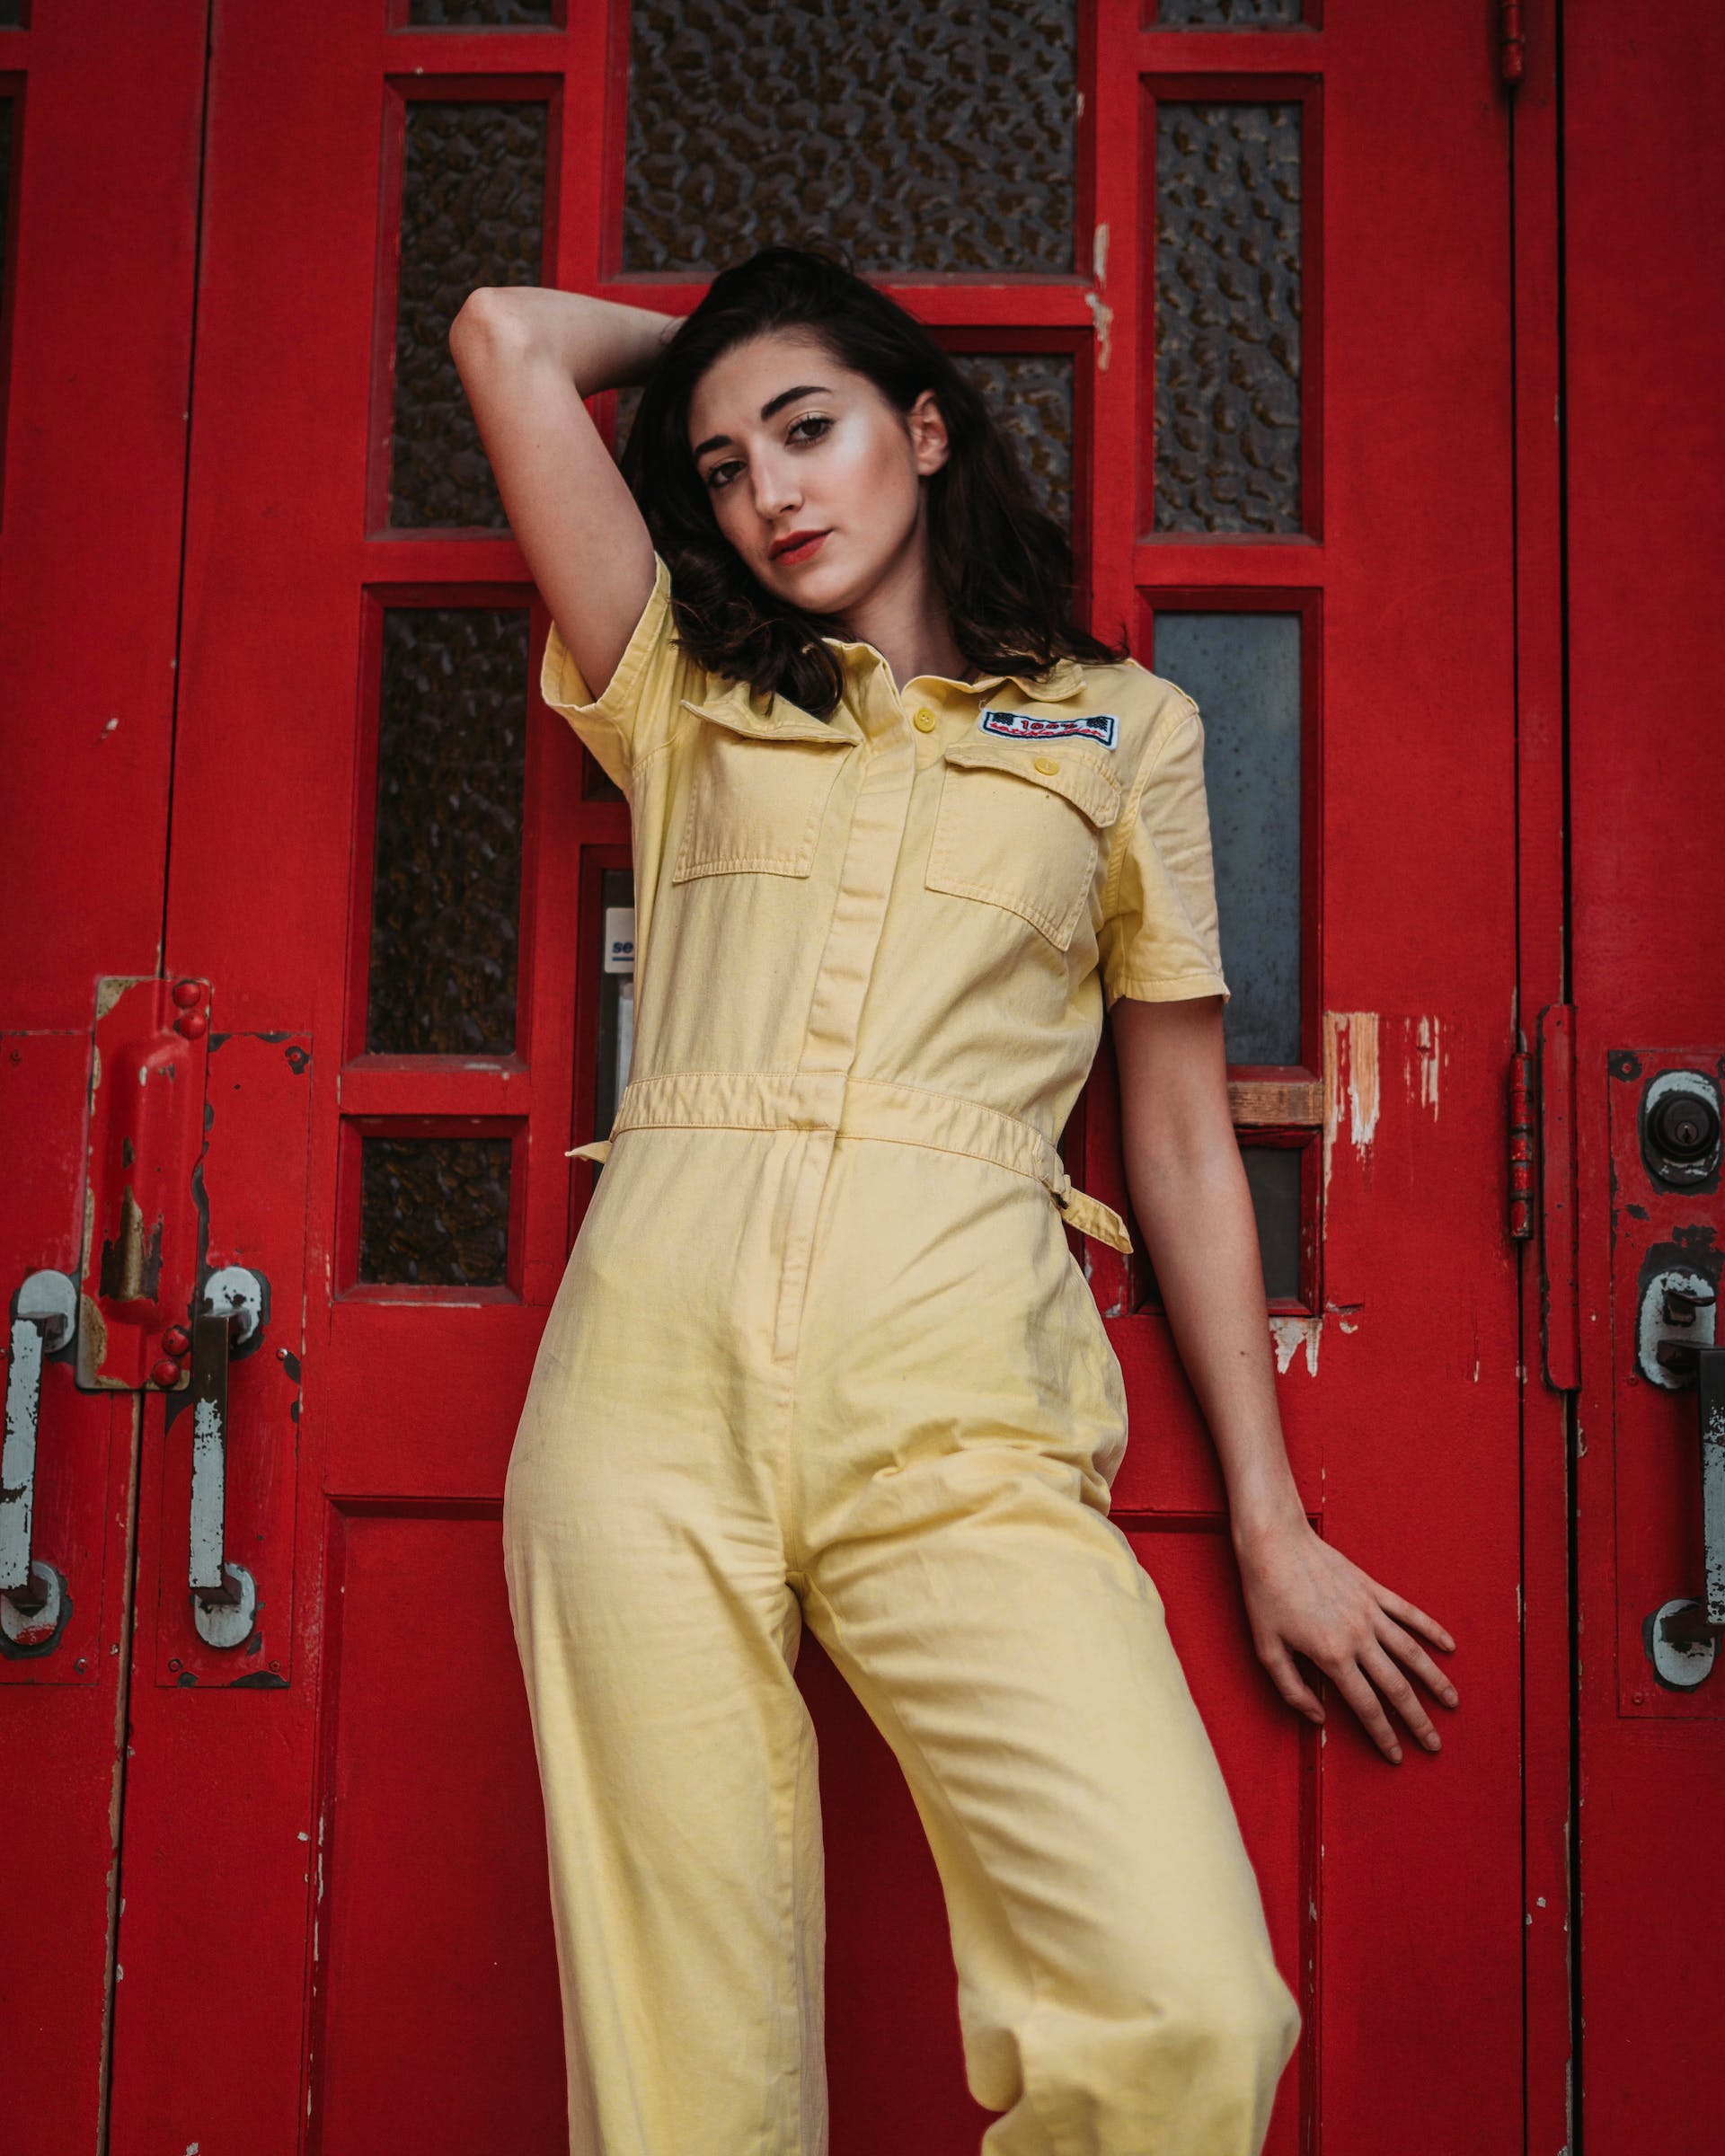 A woman in a jumpsuit | Source: Pexels